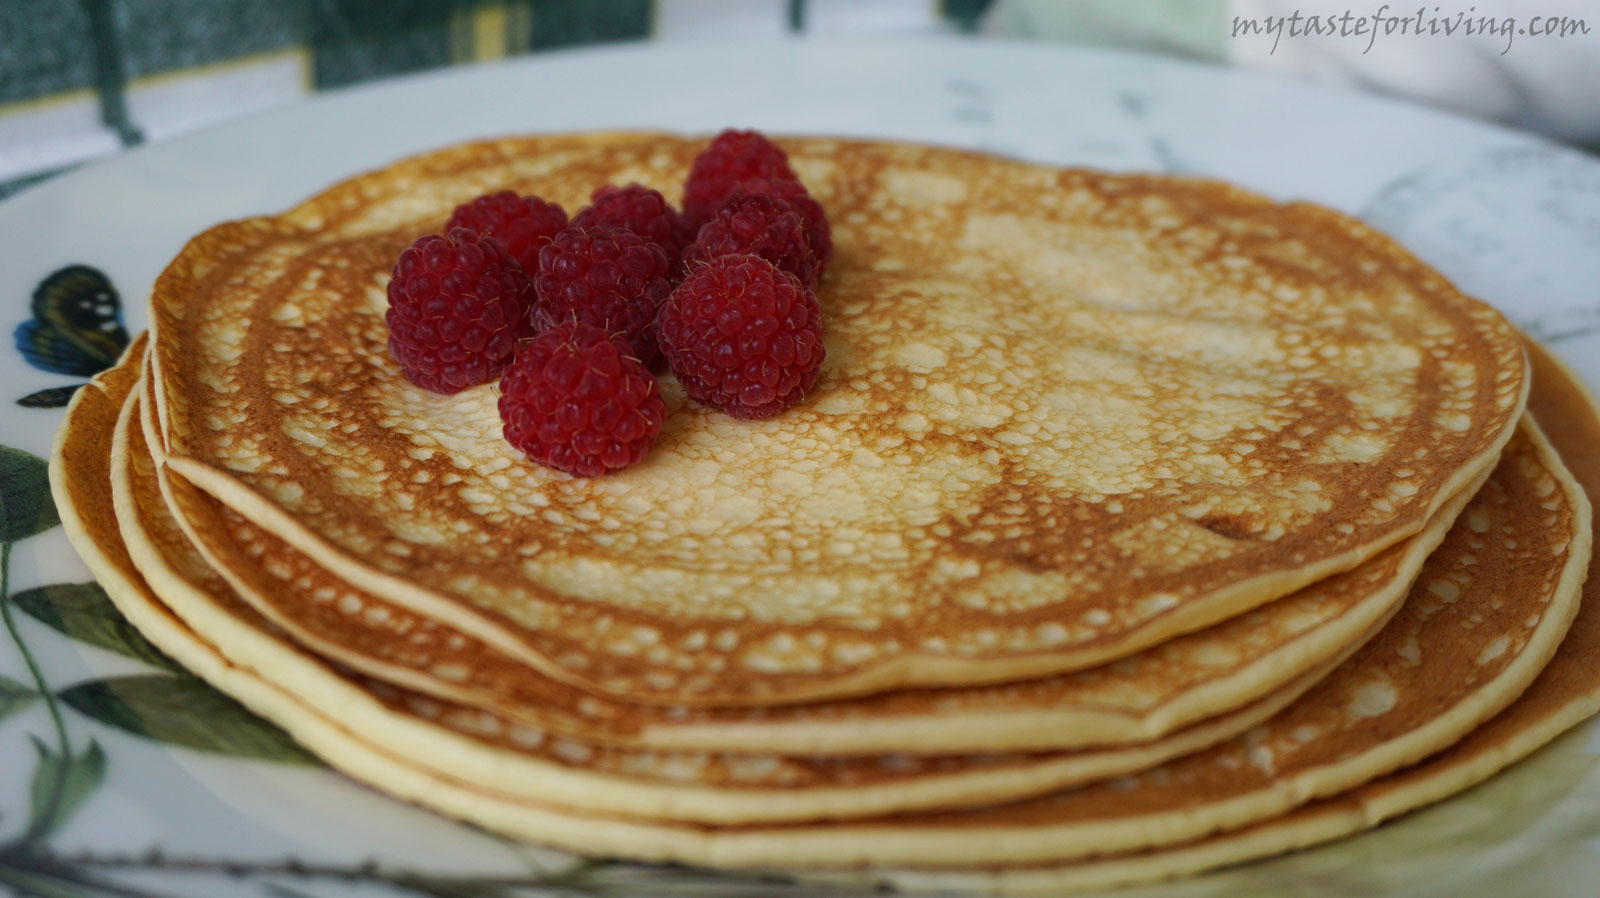 Quick pancakes of two ingredients - eggs and cream cheese.